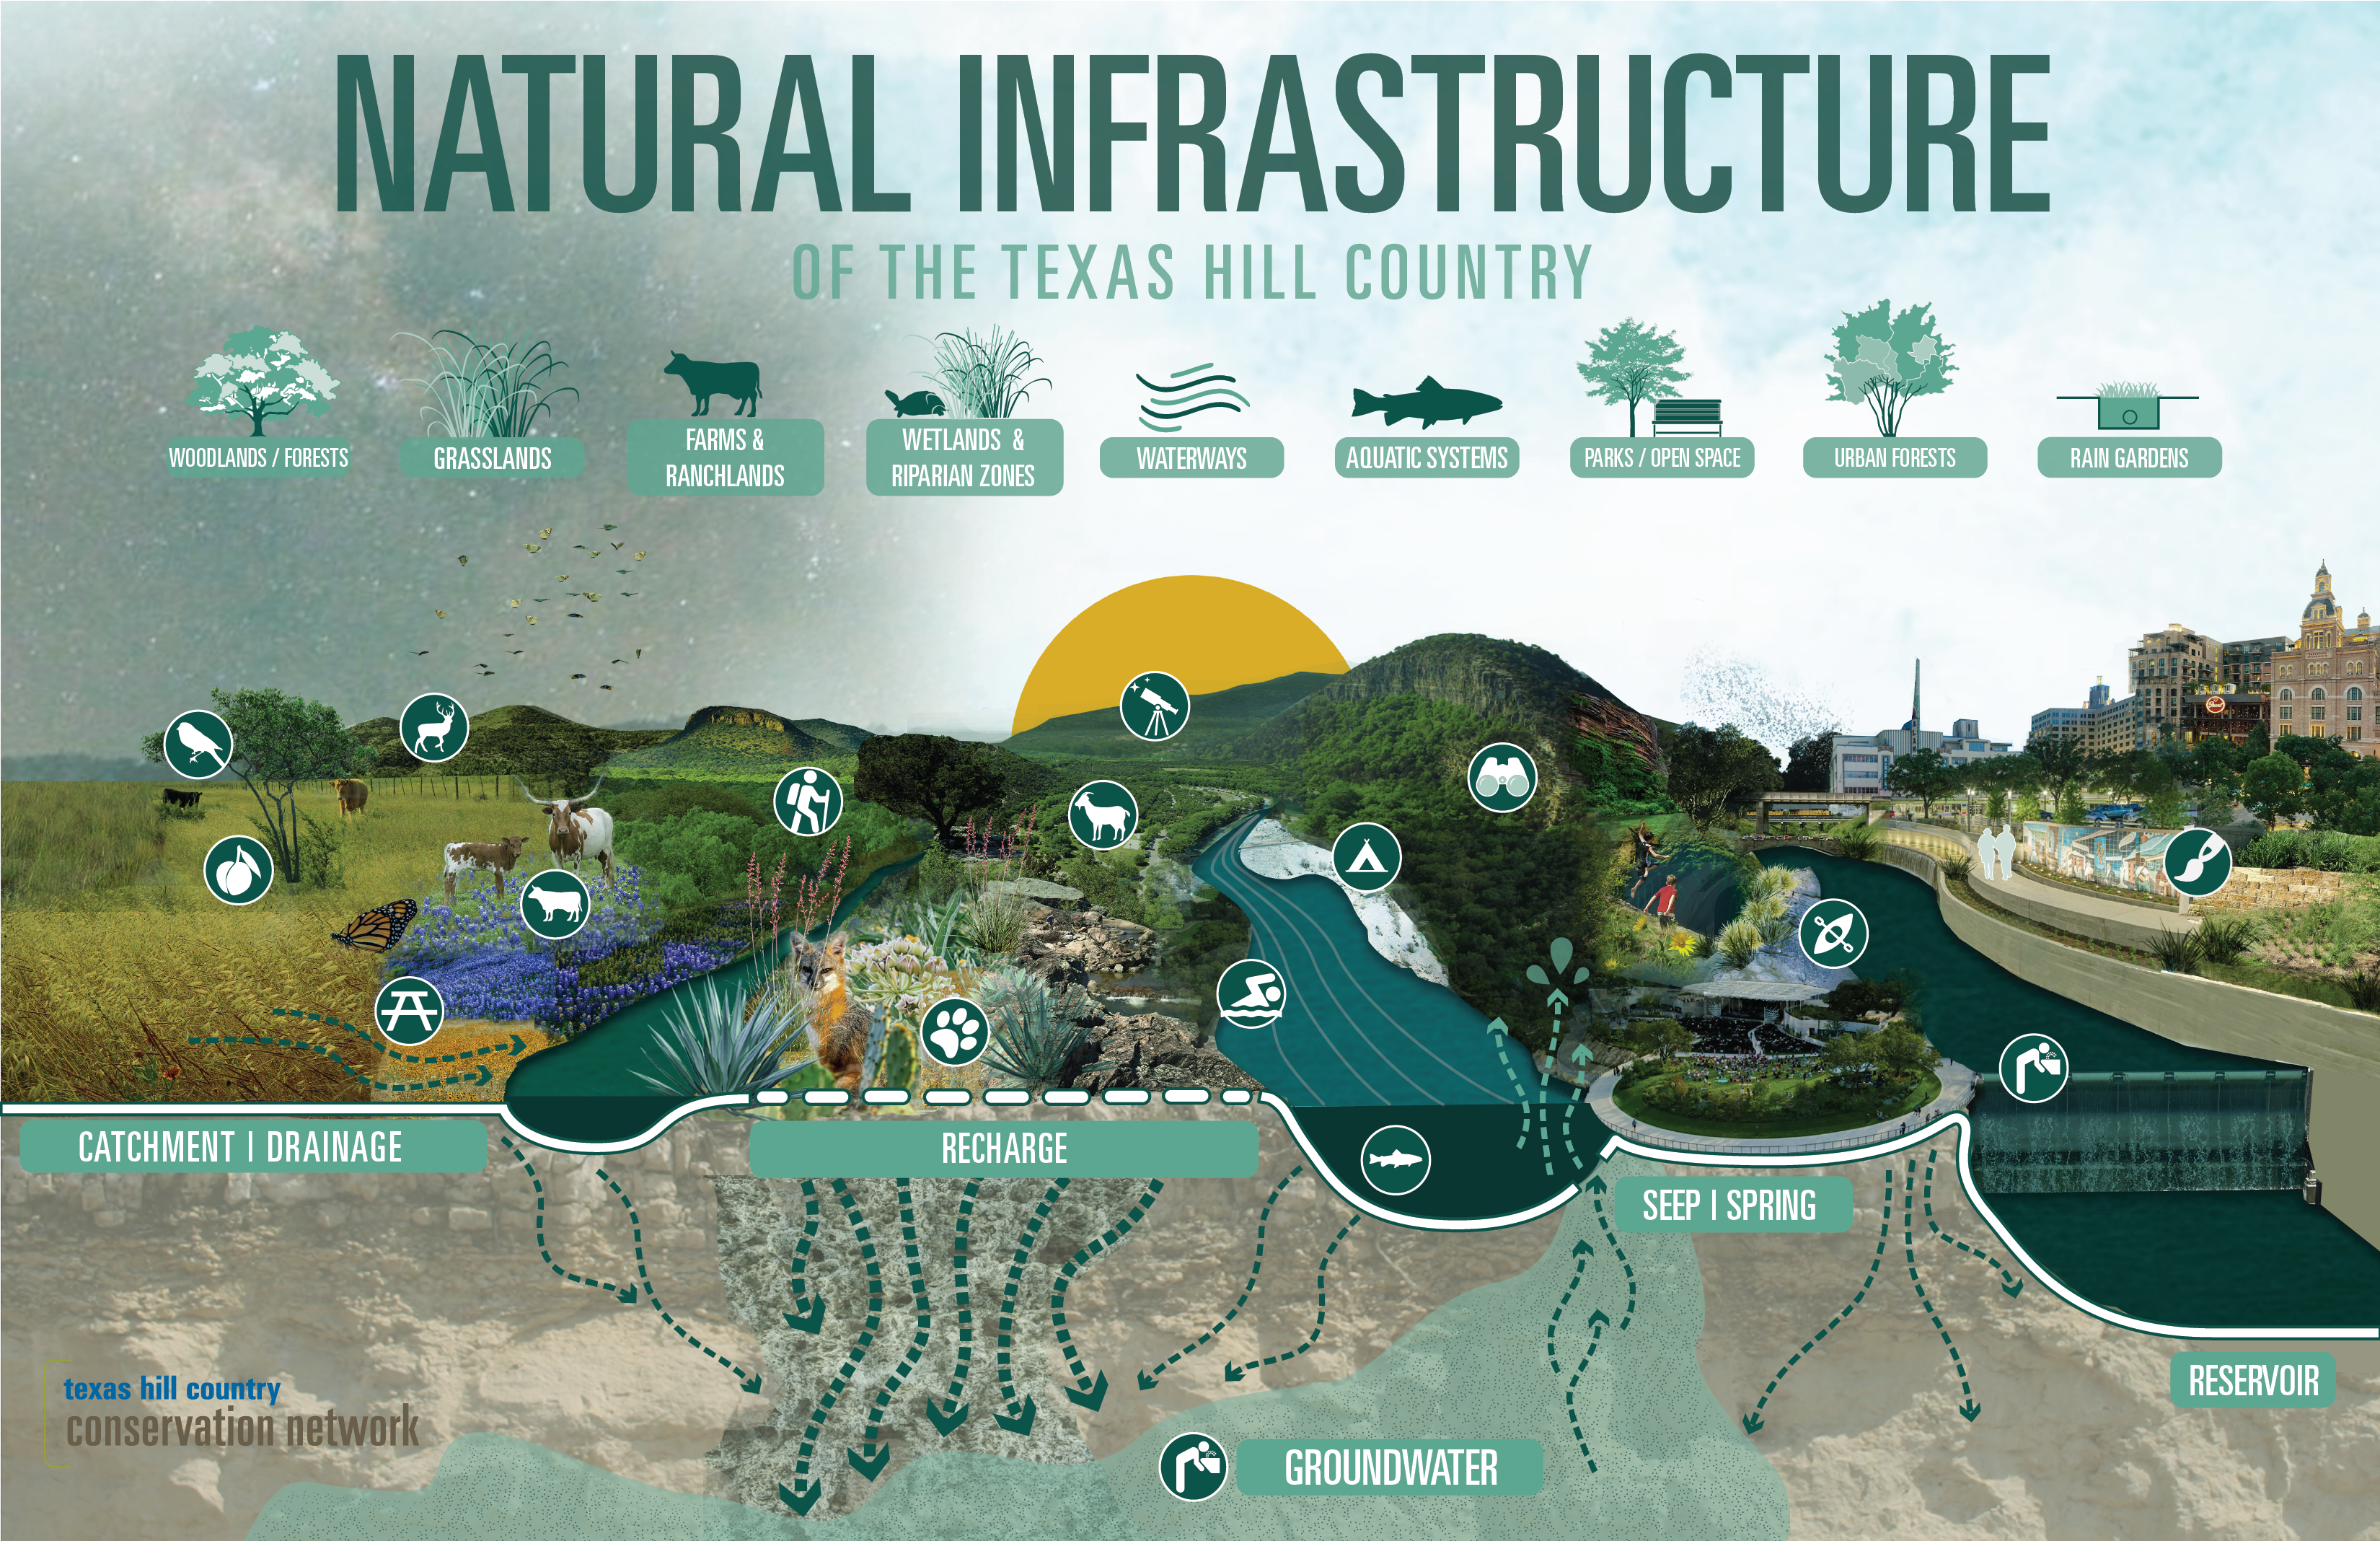 Natural infrastructure includes the woodlands and forests, grasslands, wetlands, rangeland, and other natural systems and features that enhance water quality, recharge aquifers, protect drinking water, support wildlife, prevent soil erosion, clean the air, reduce flood risk, and minimize the impacts of extreme weather. In cities and towns, urban forests, rain gardens, and open space in parks also represent natural infrastructure. Protecting, restoring, and enhancing natural infrastructure provides critical and cost-effective environmental, health, social, and economic benefits.